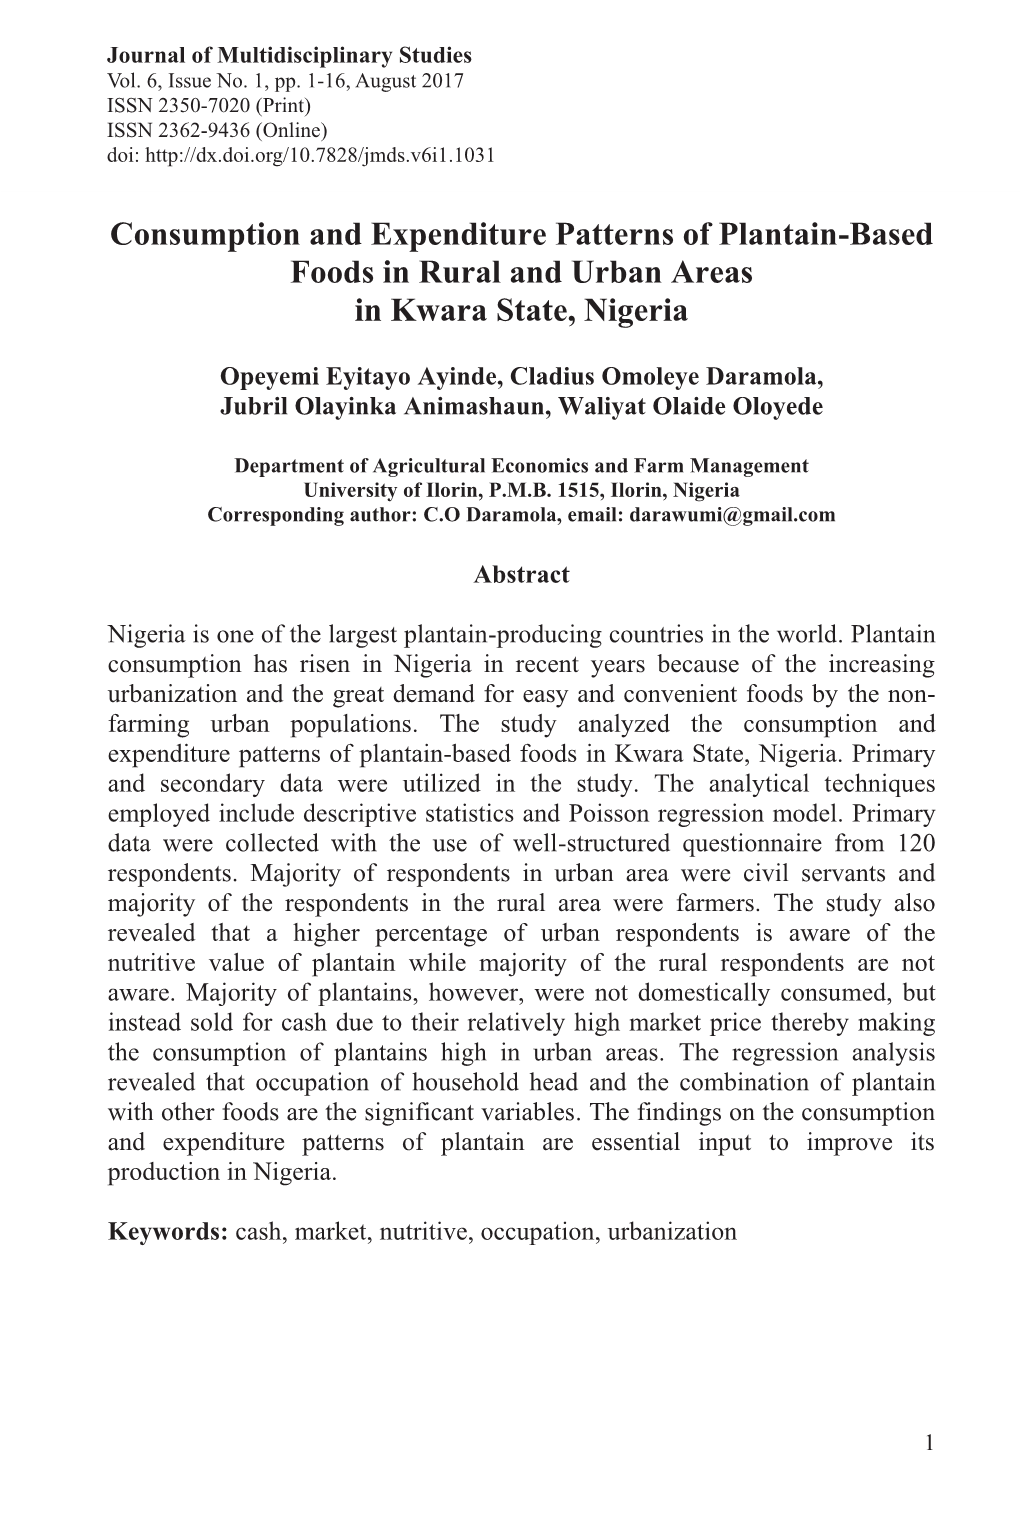 Consumption and Expenditure Patterns of Plantain-Based Foods in Rural and Urban Areas in Kwara State, Nigeria